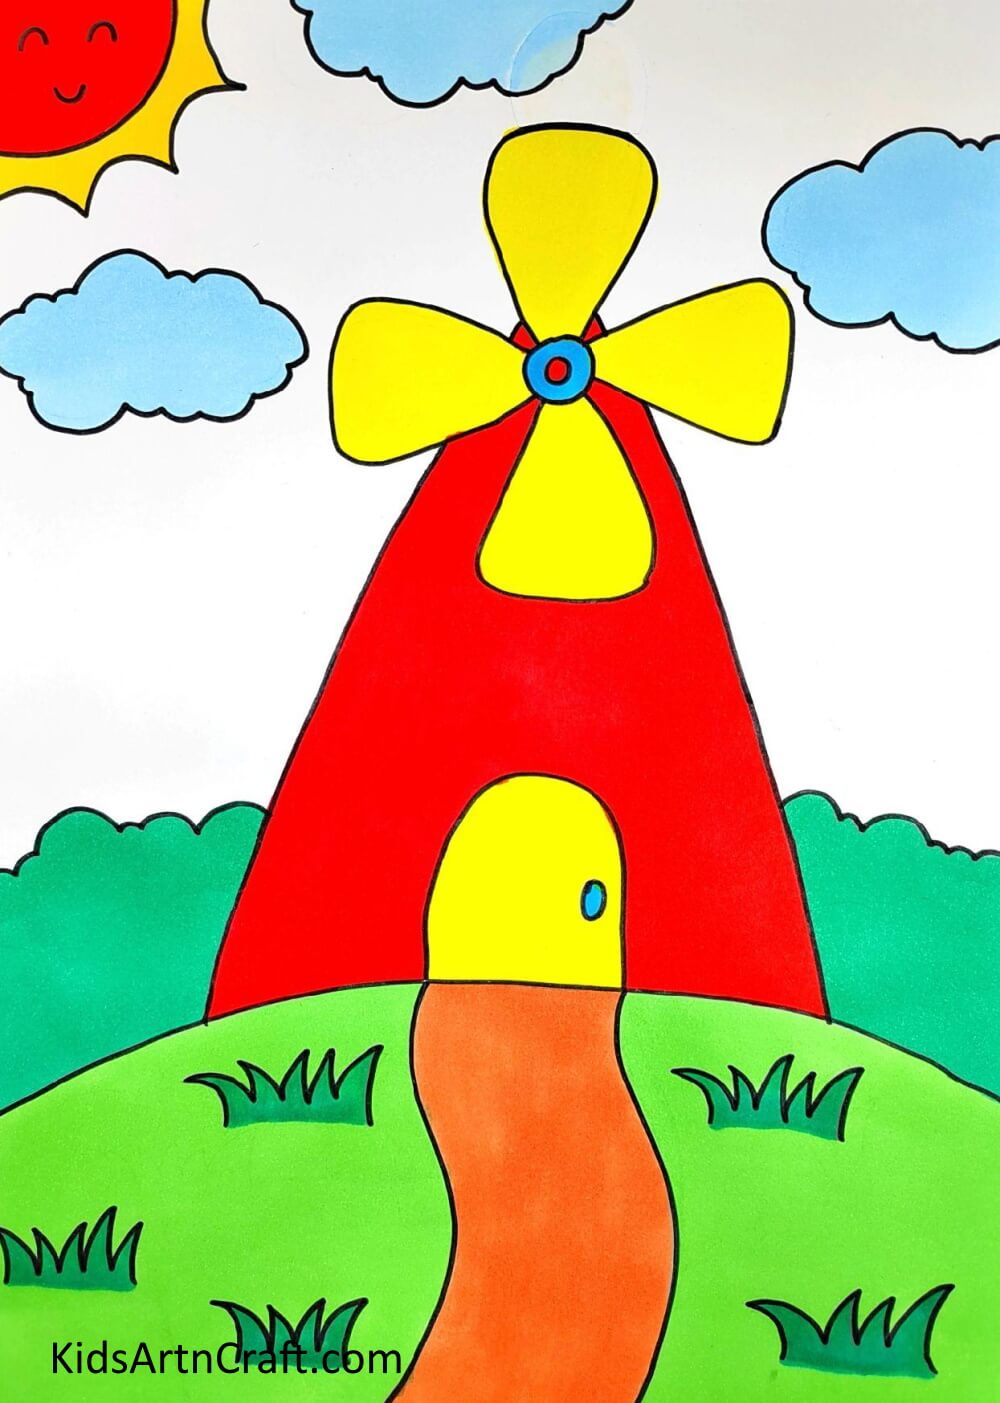 Coloring The Drawing - Drawing and Coloring a Windmill: A Tutorial for Little Ones